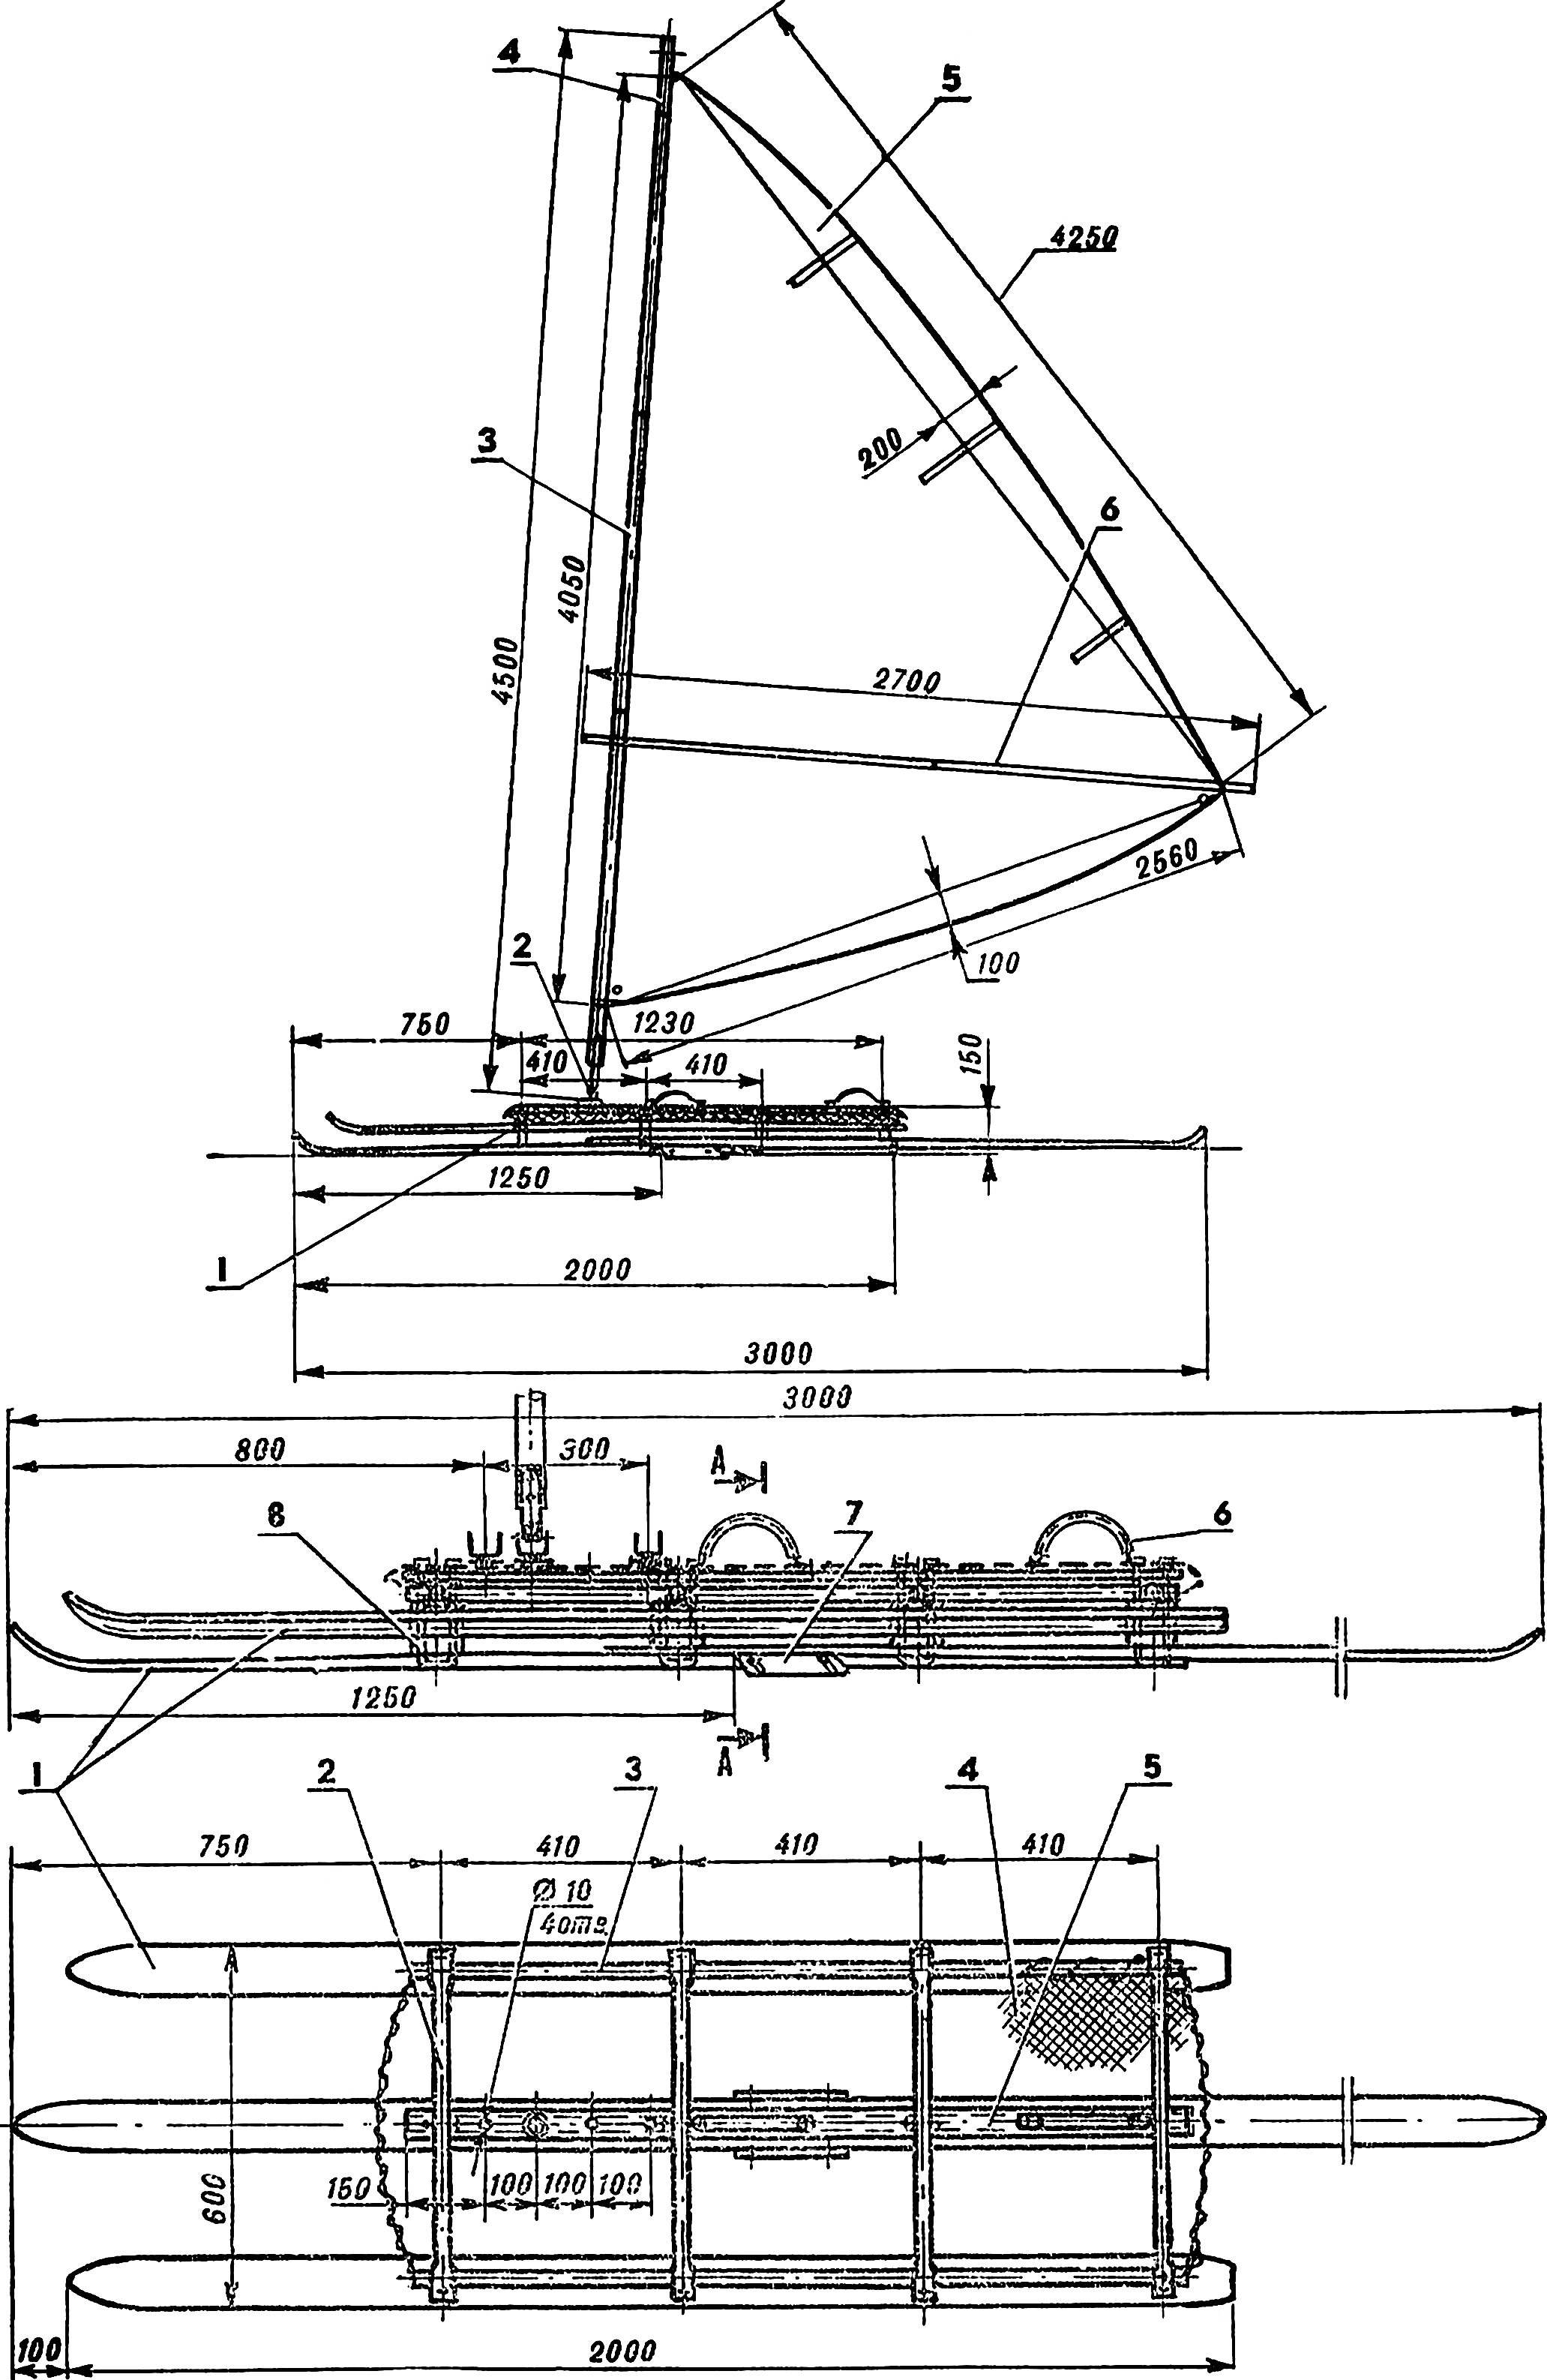 Fig. 1. General view of the sailing sleds.